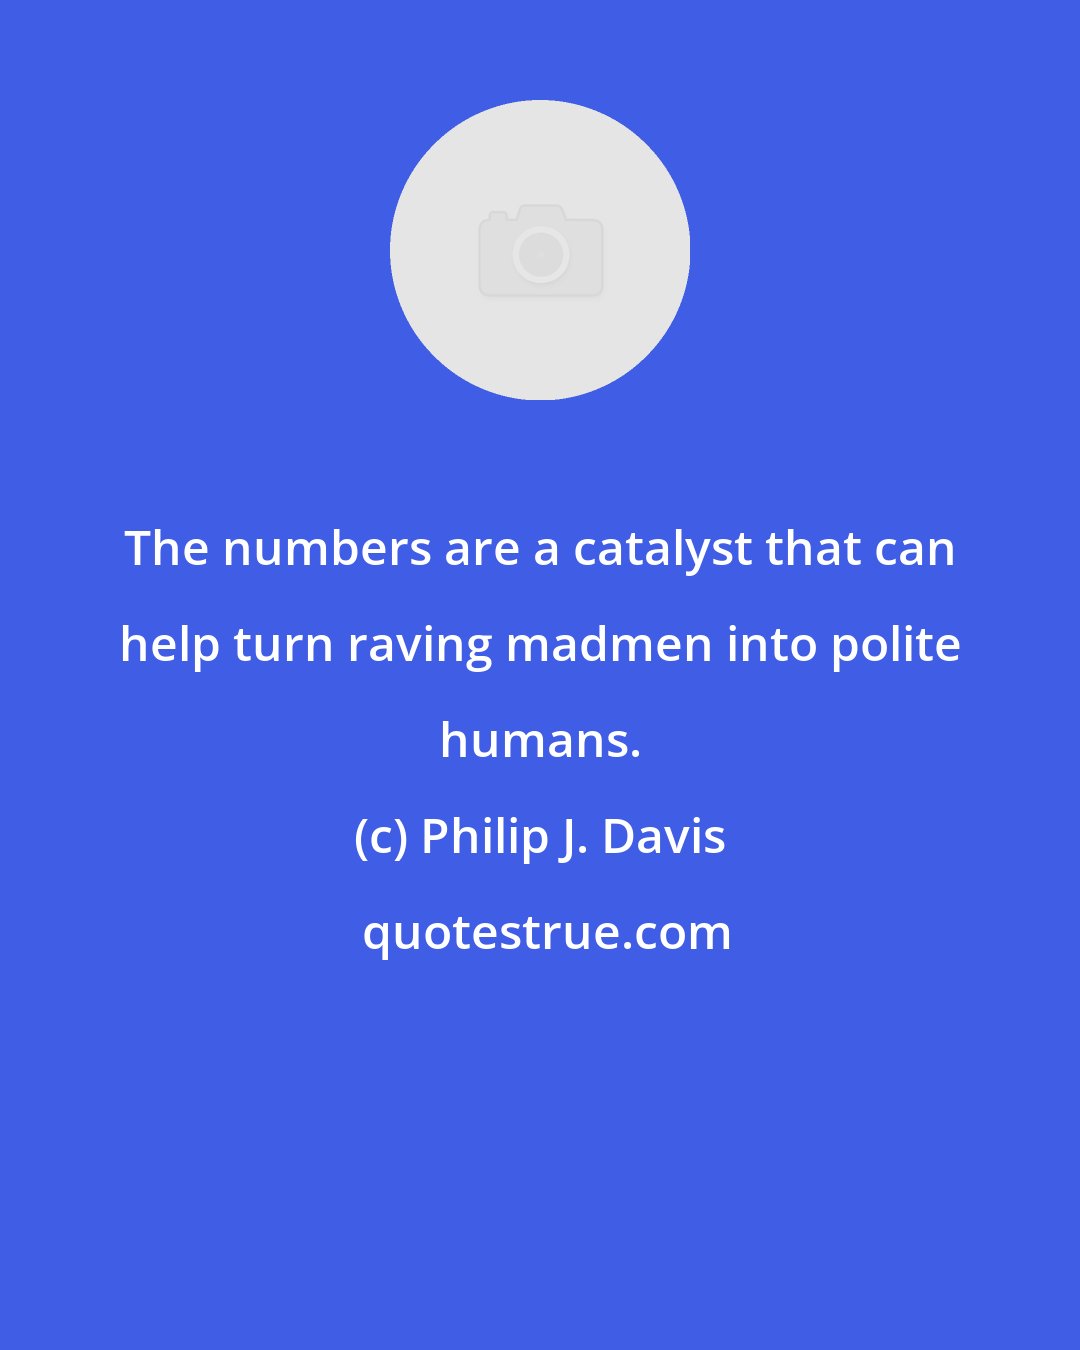 Philip J. Davis: The numbers are a catalyst that can help turn raving madmen into polite humans.